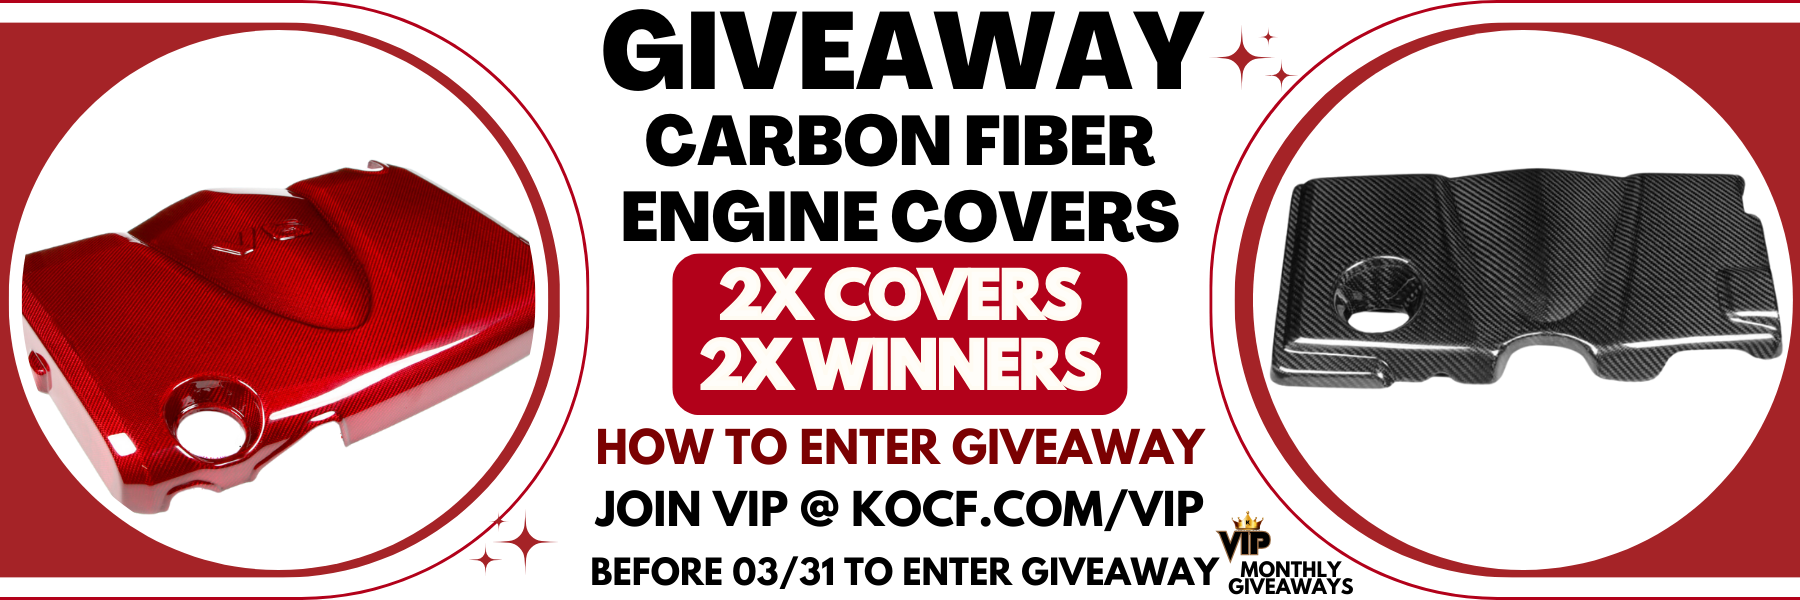 Engine Cover Giveaway (1).png__PID:b9f26dca-cbde-43ab-9049-477c78ca4eab